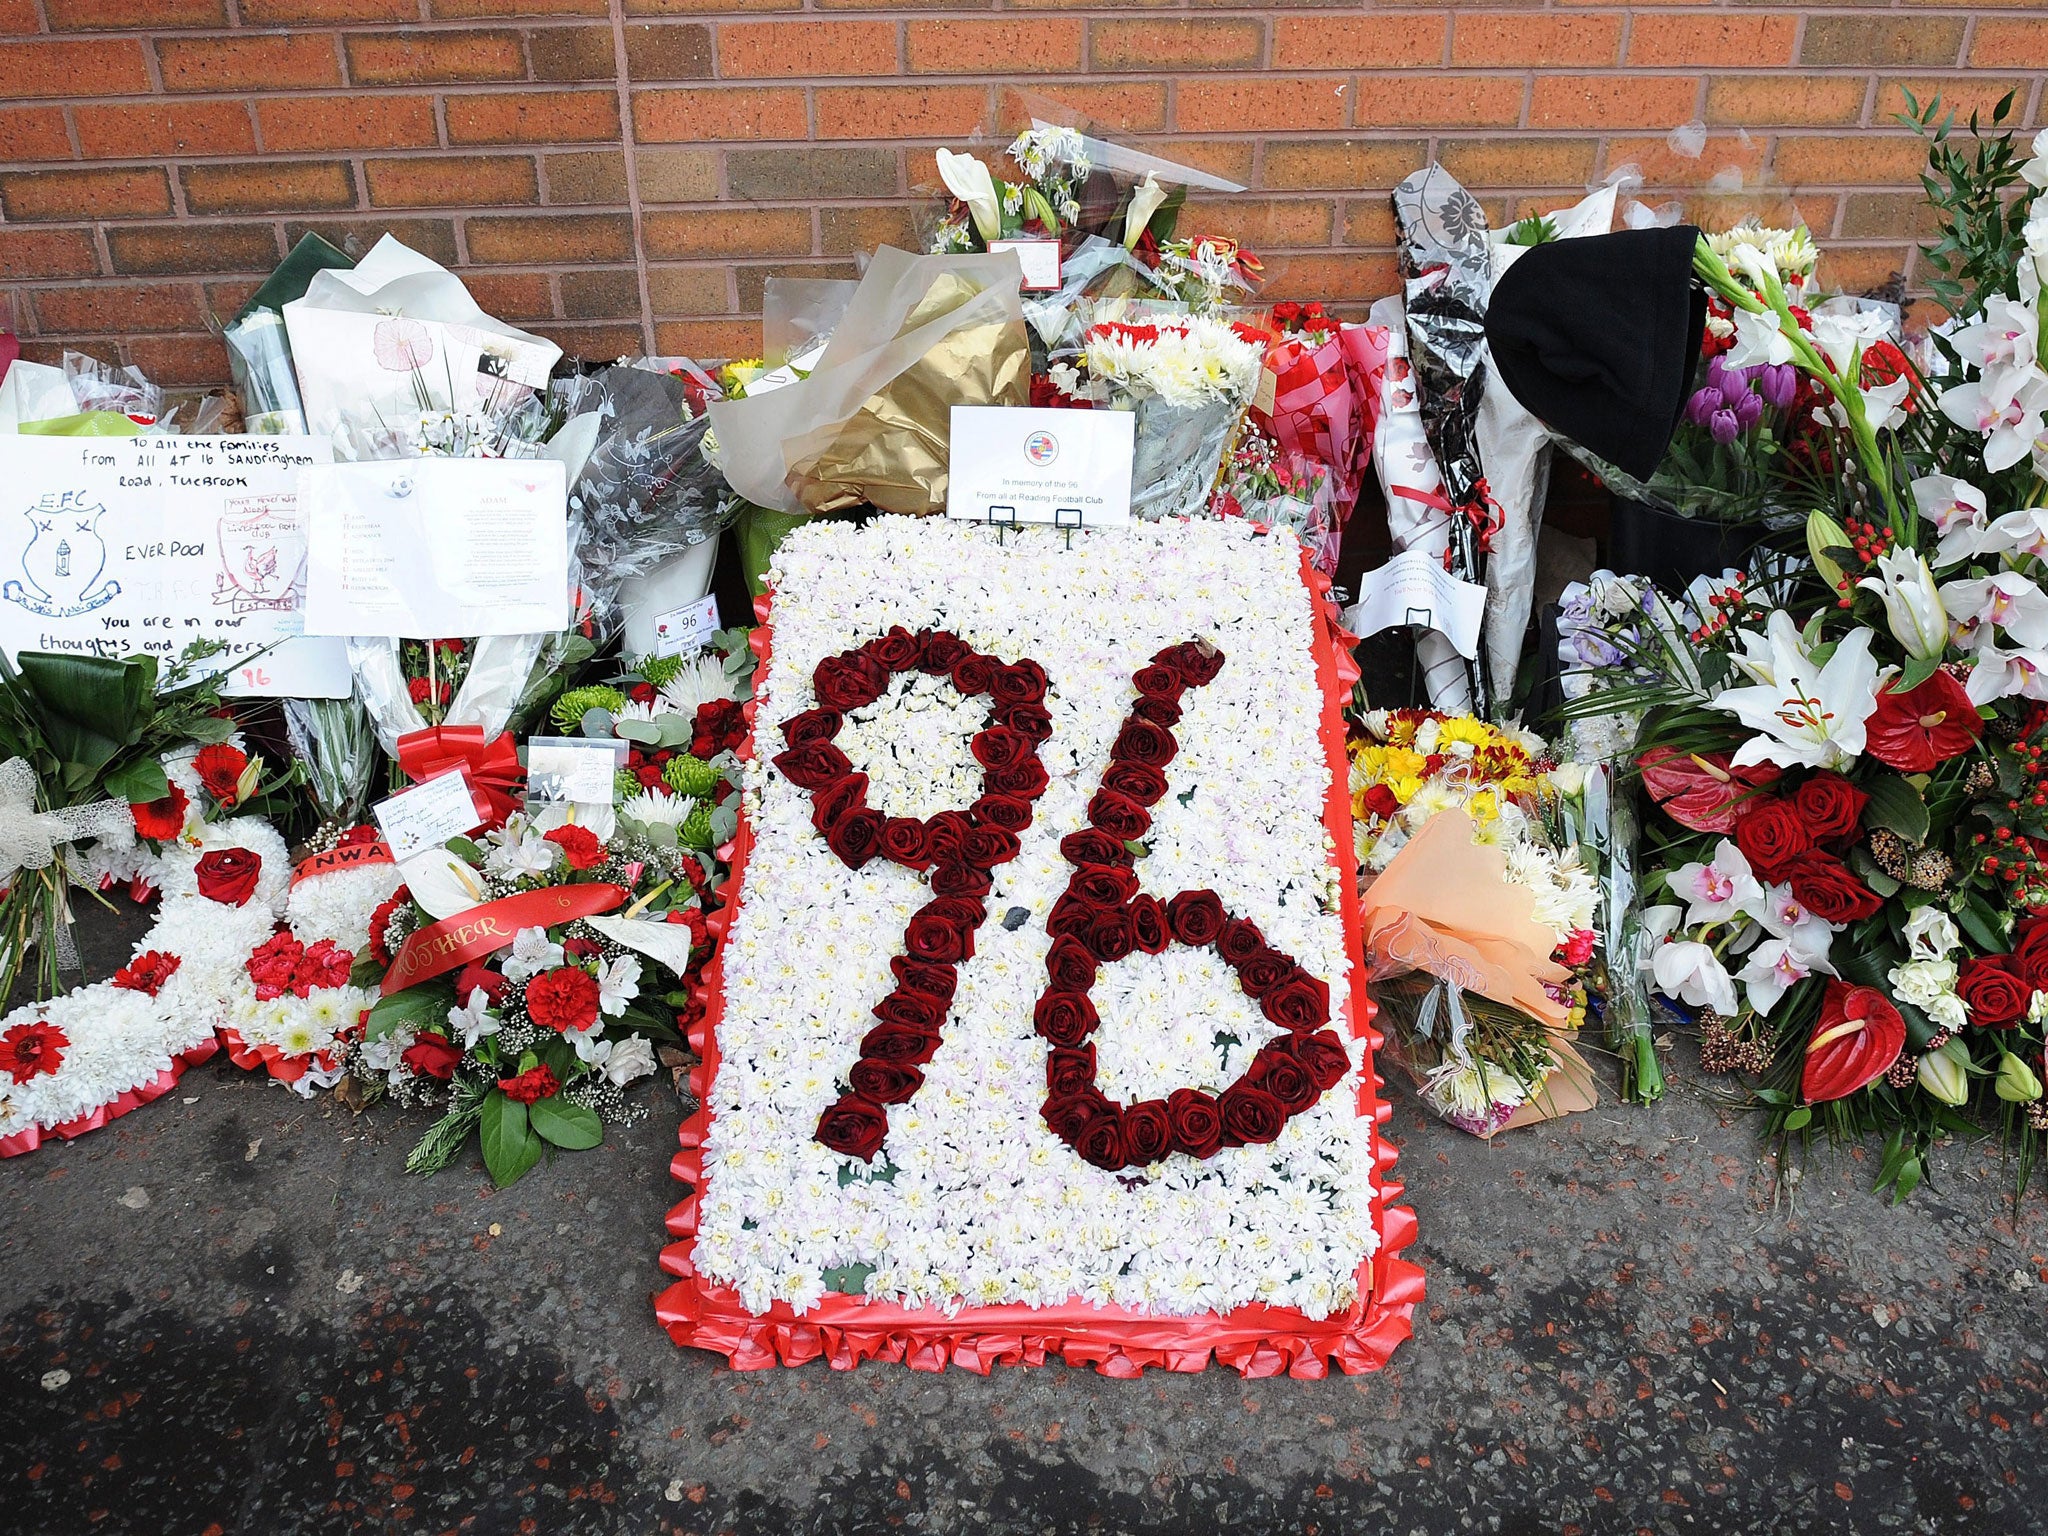 A memorial outside Anfield for the 96 fans who died in the Hillsborough Stadium disaster